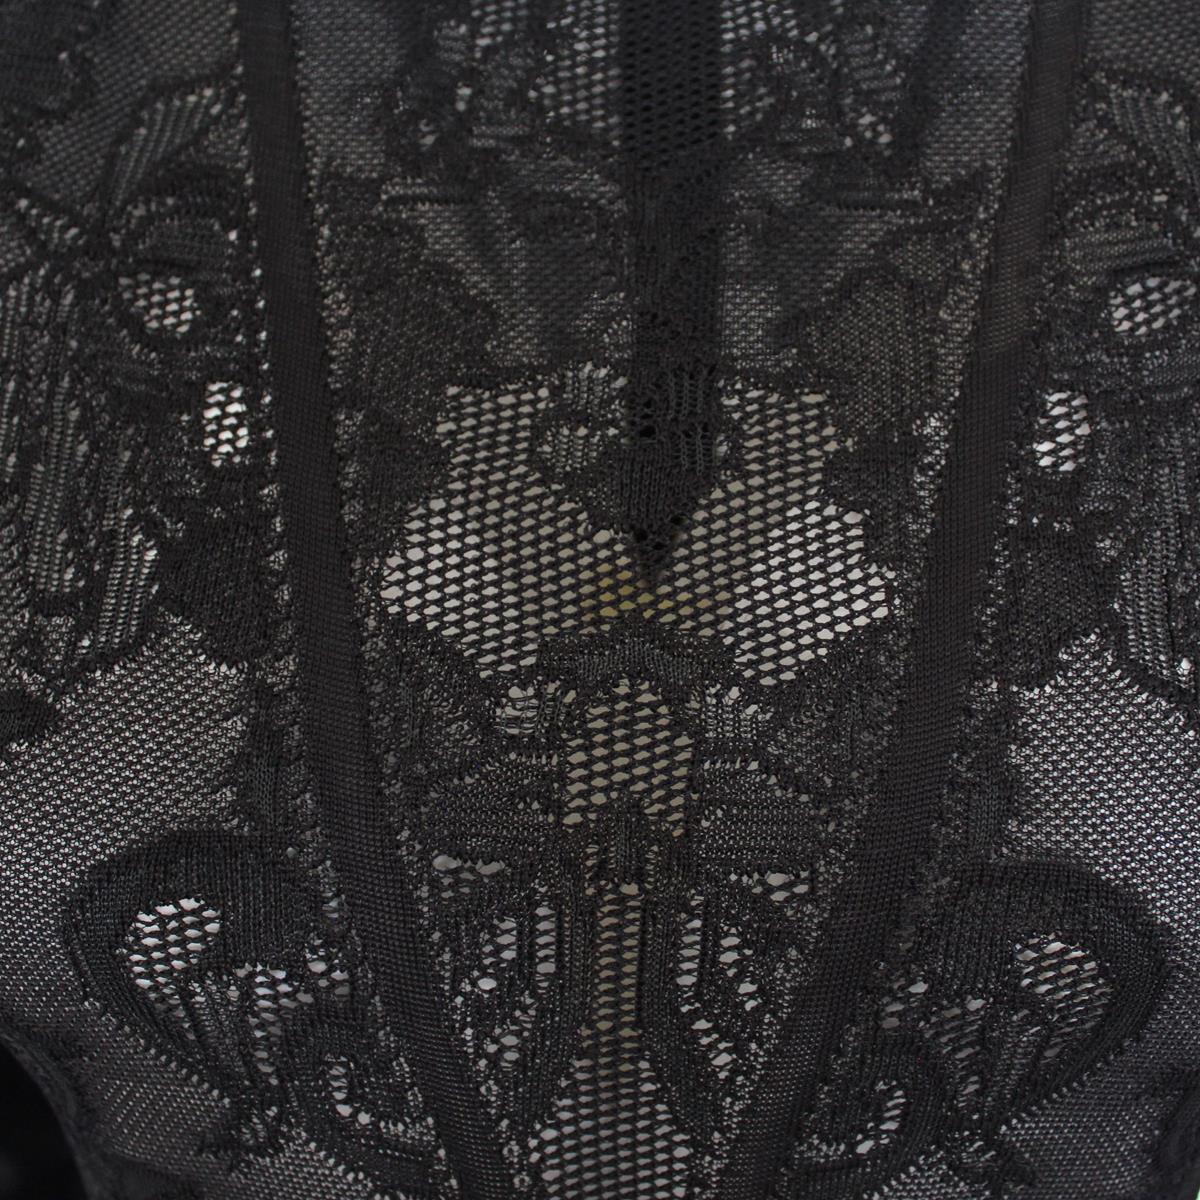 Zuhair Murad Black Lace Overall It 40 In Excellent Condition For Sale In Gazzaniga (BG), IT